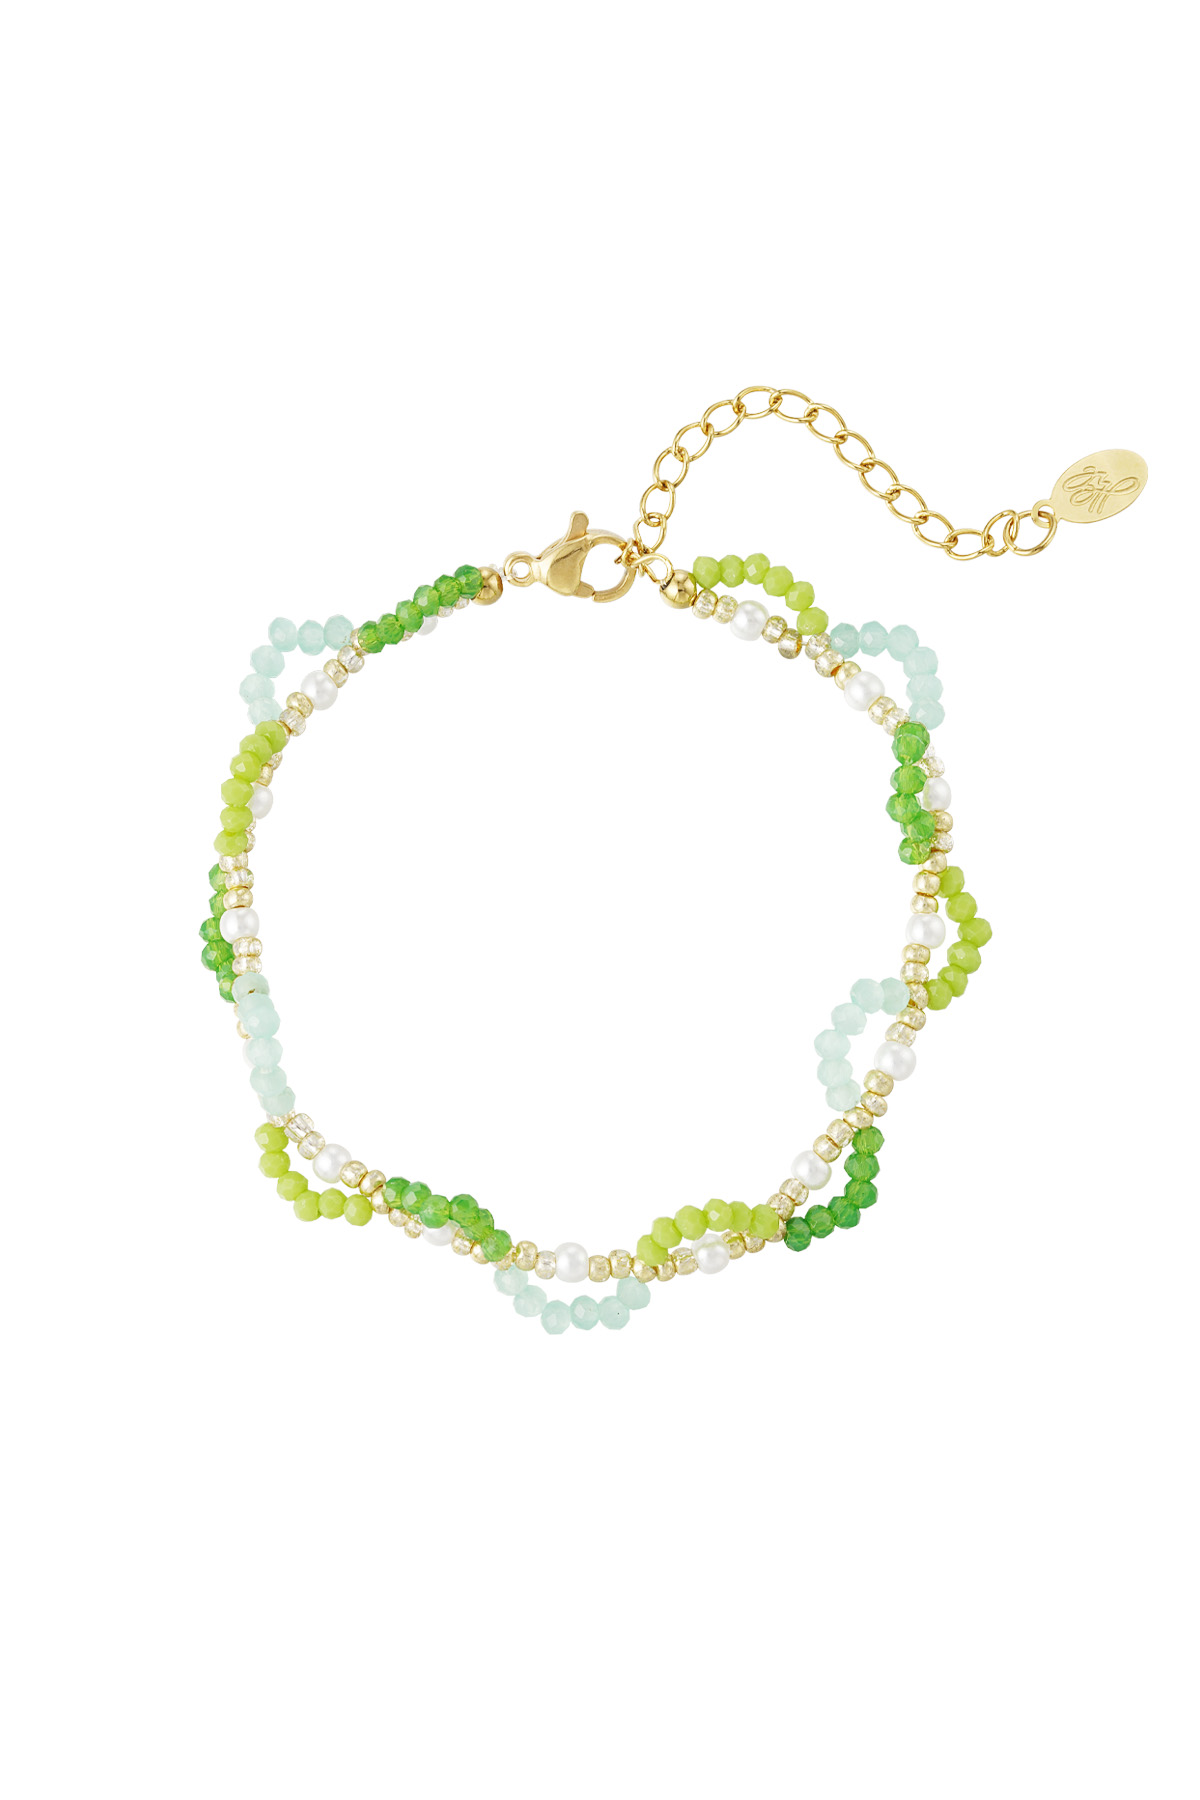 Amrband spring must have - or vert